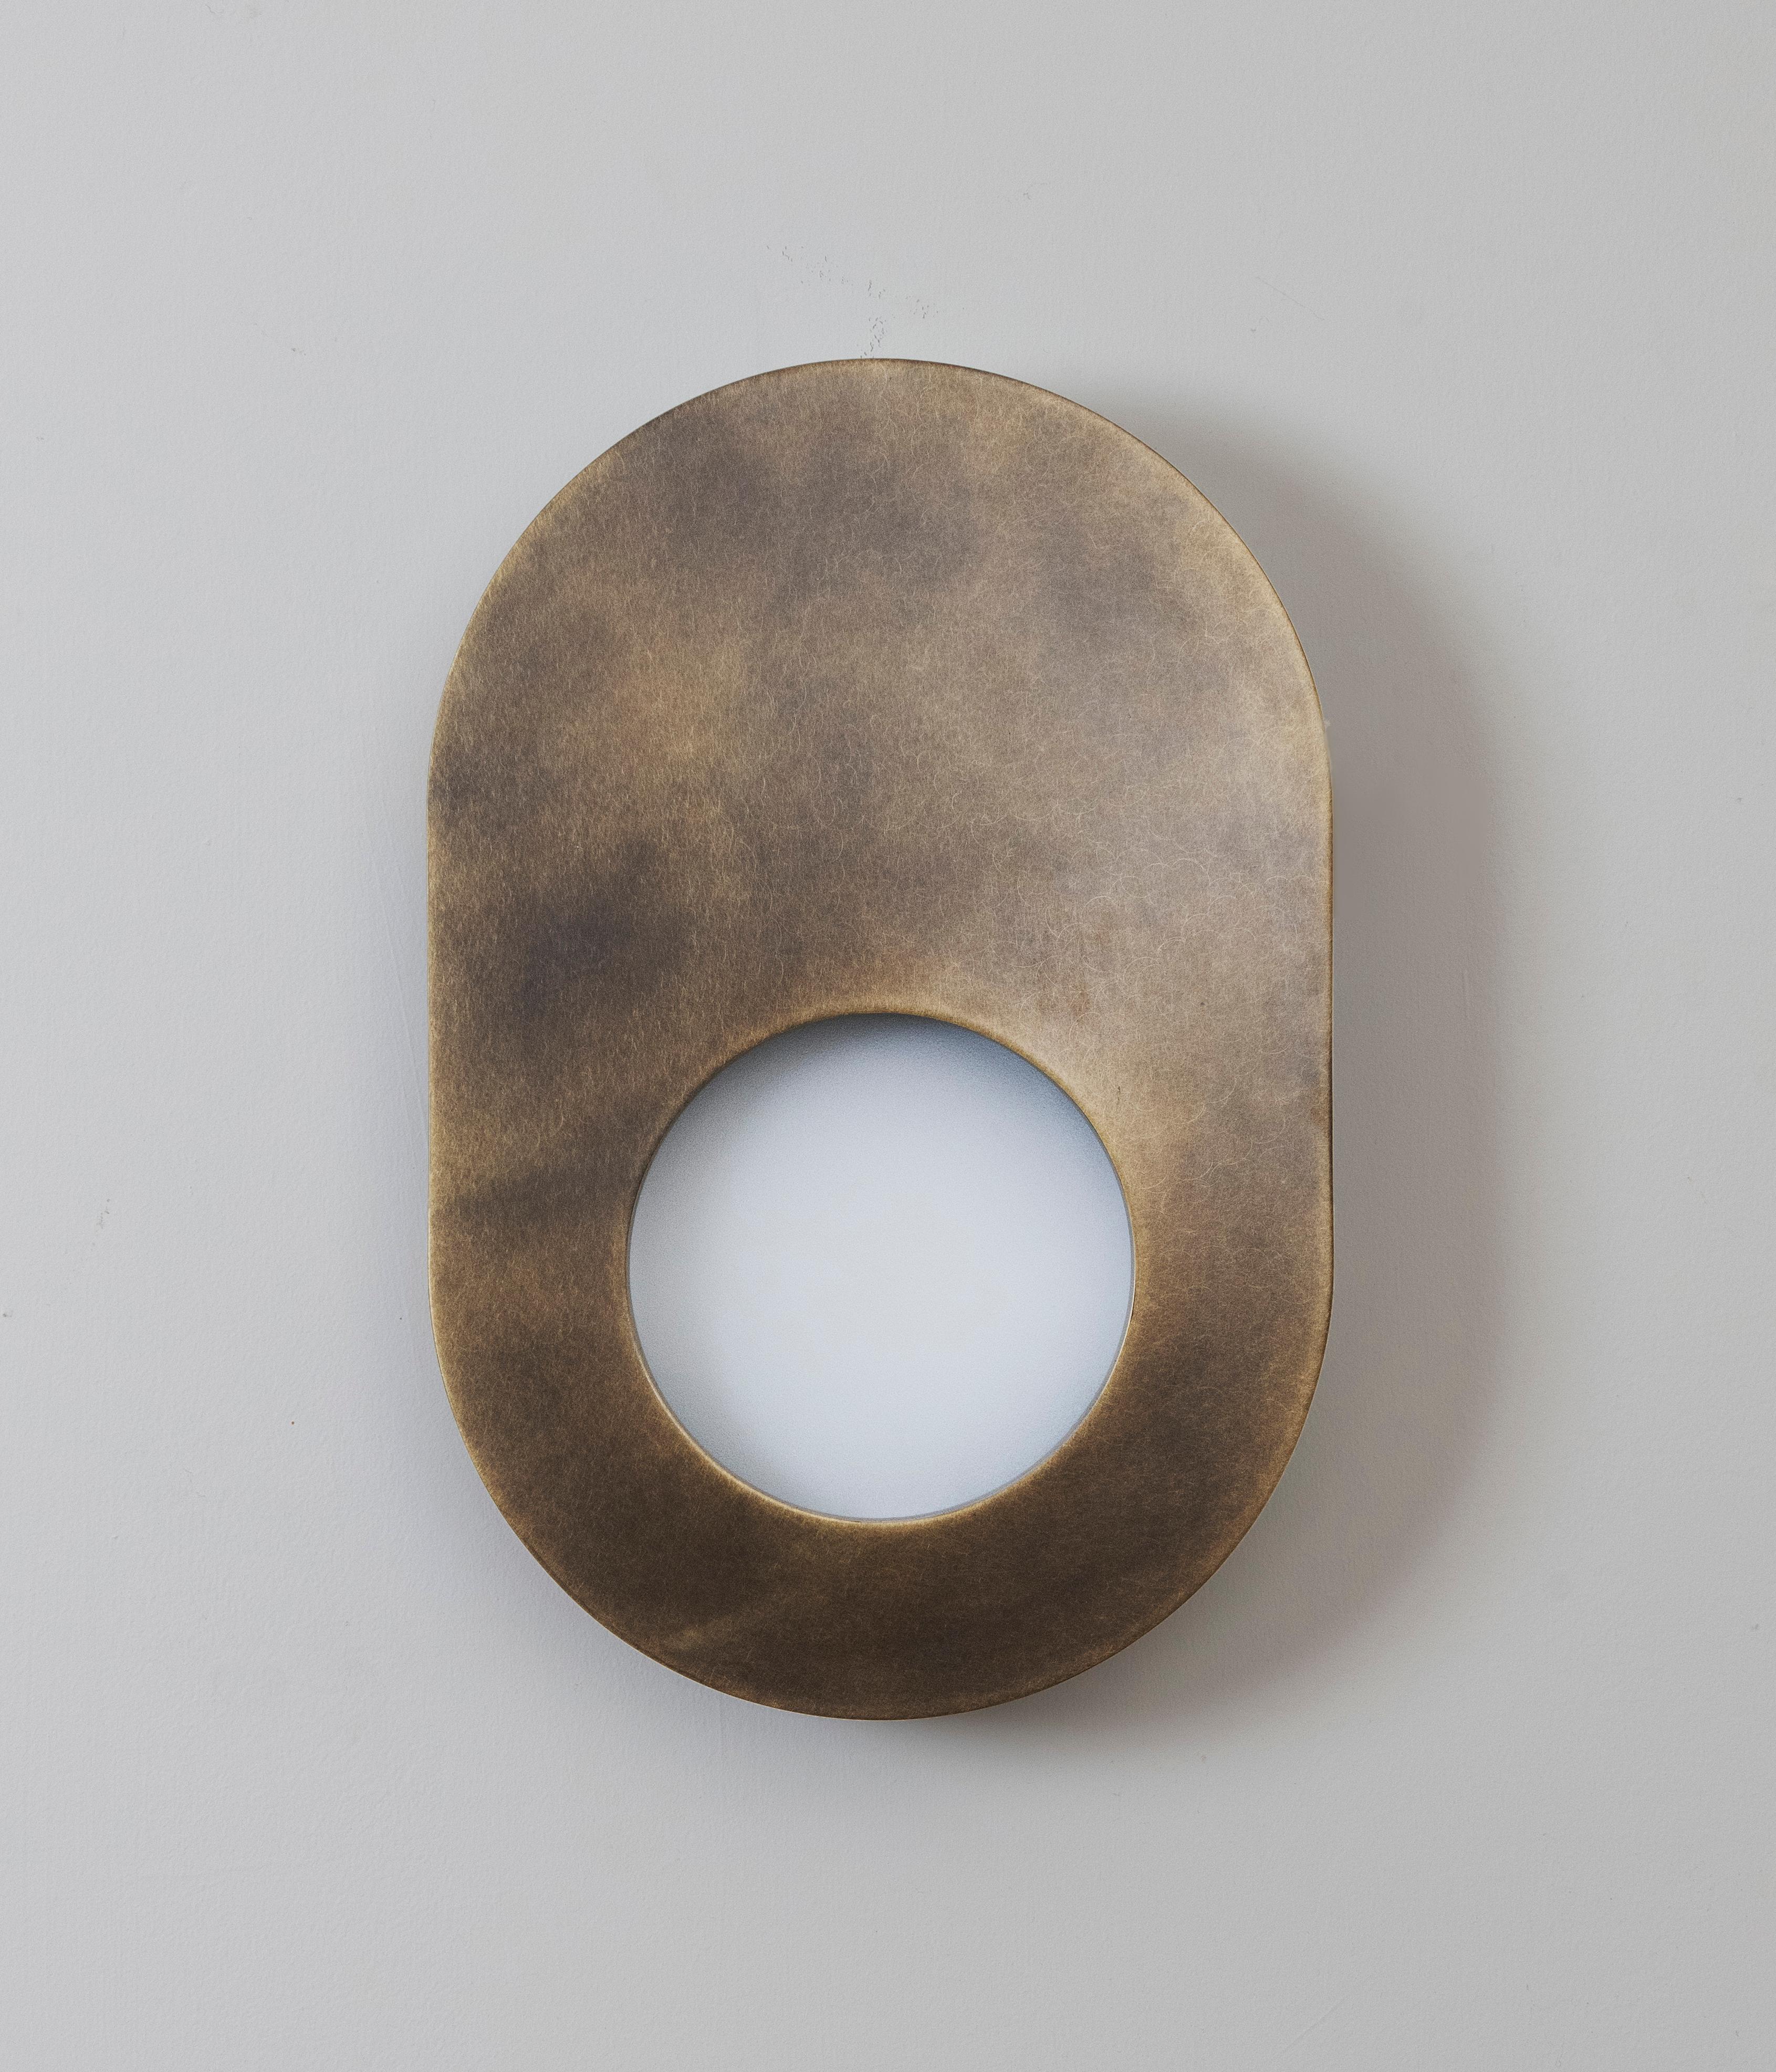 Konekt Portal Sconce Oval in Polished Brass In New Condition For Sale In New York, NY